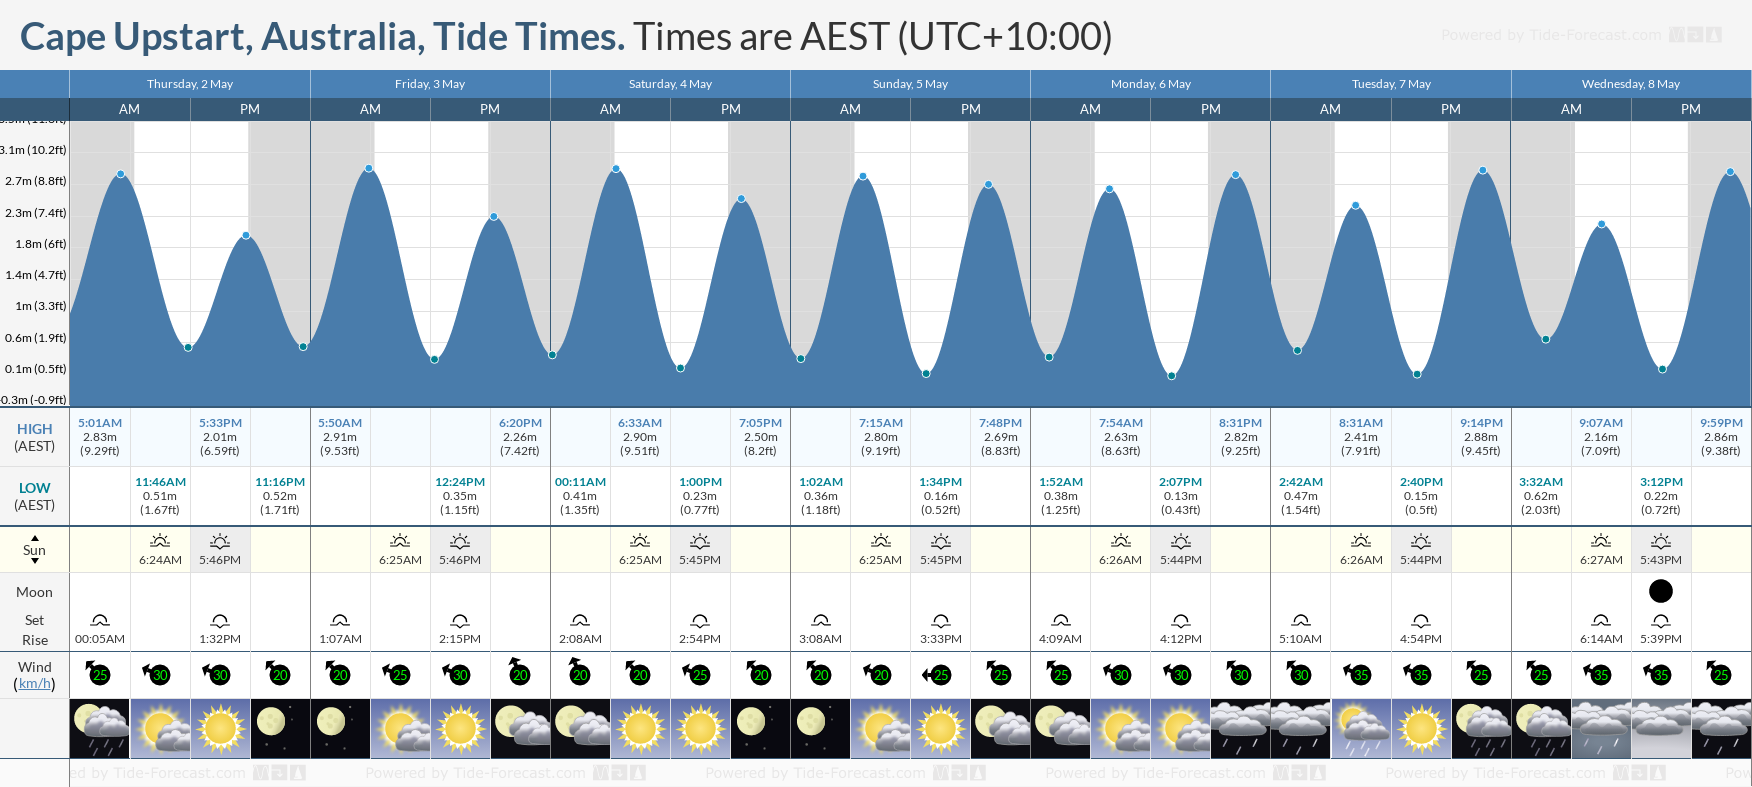 Cape Upstart, Australia Tide Chart including high and low tide tide times for the next 7 days